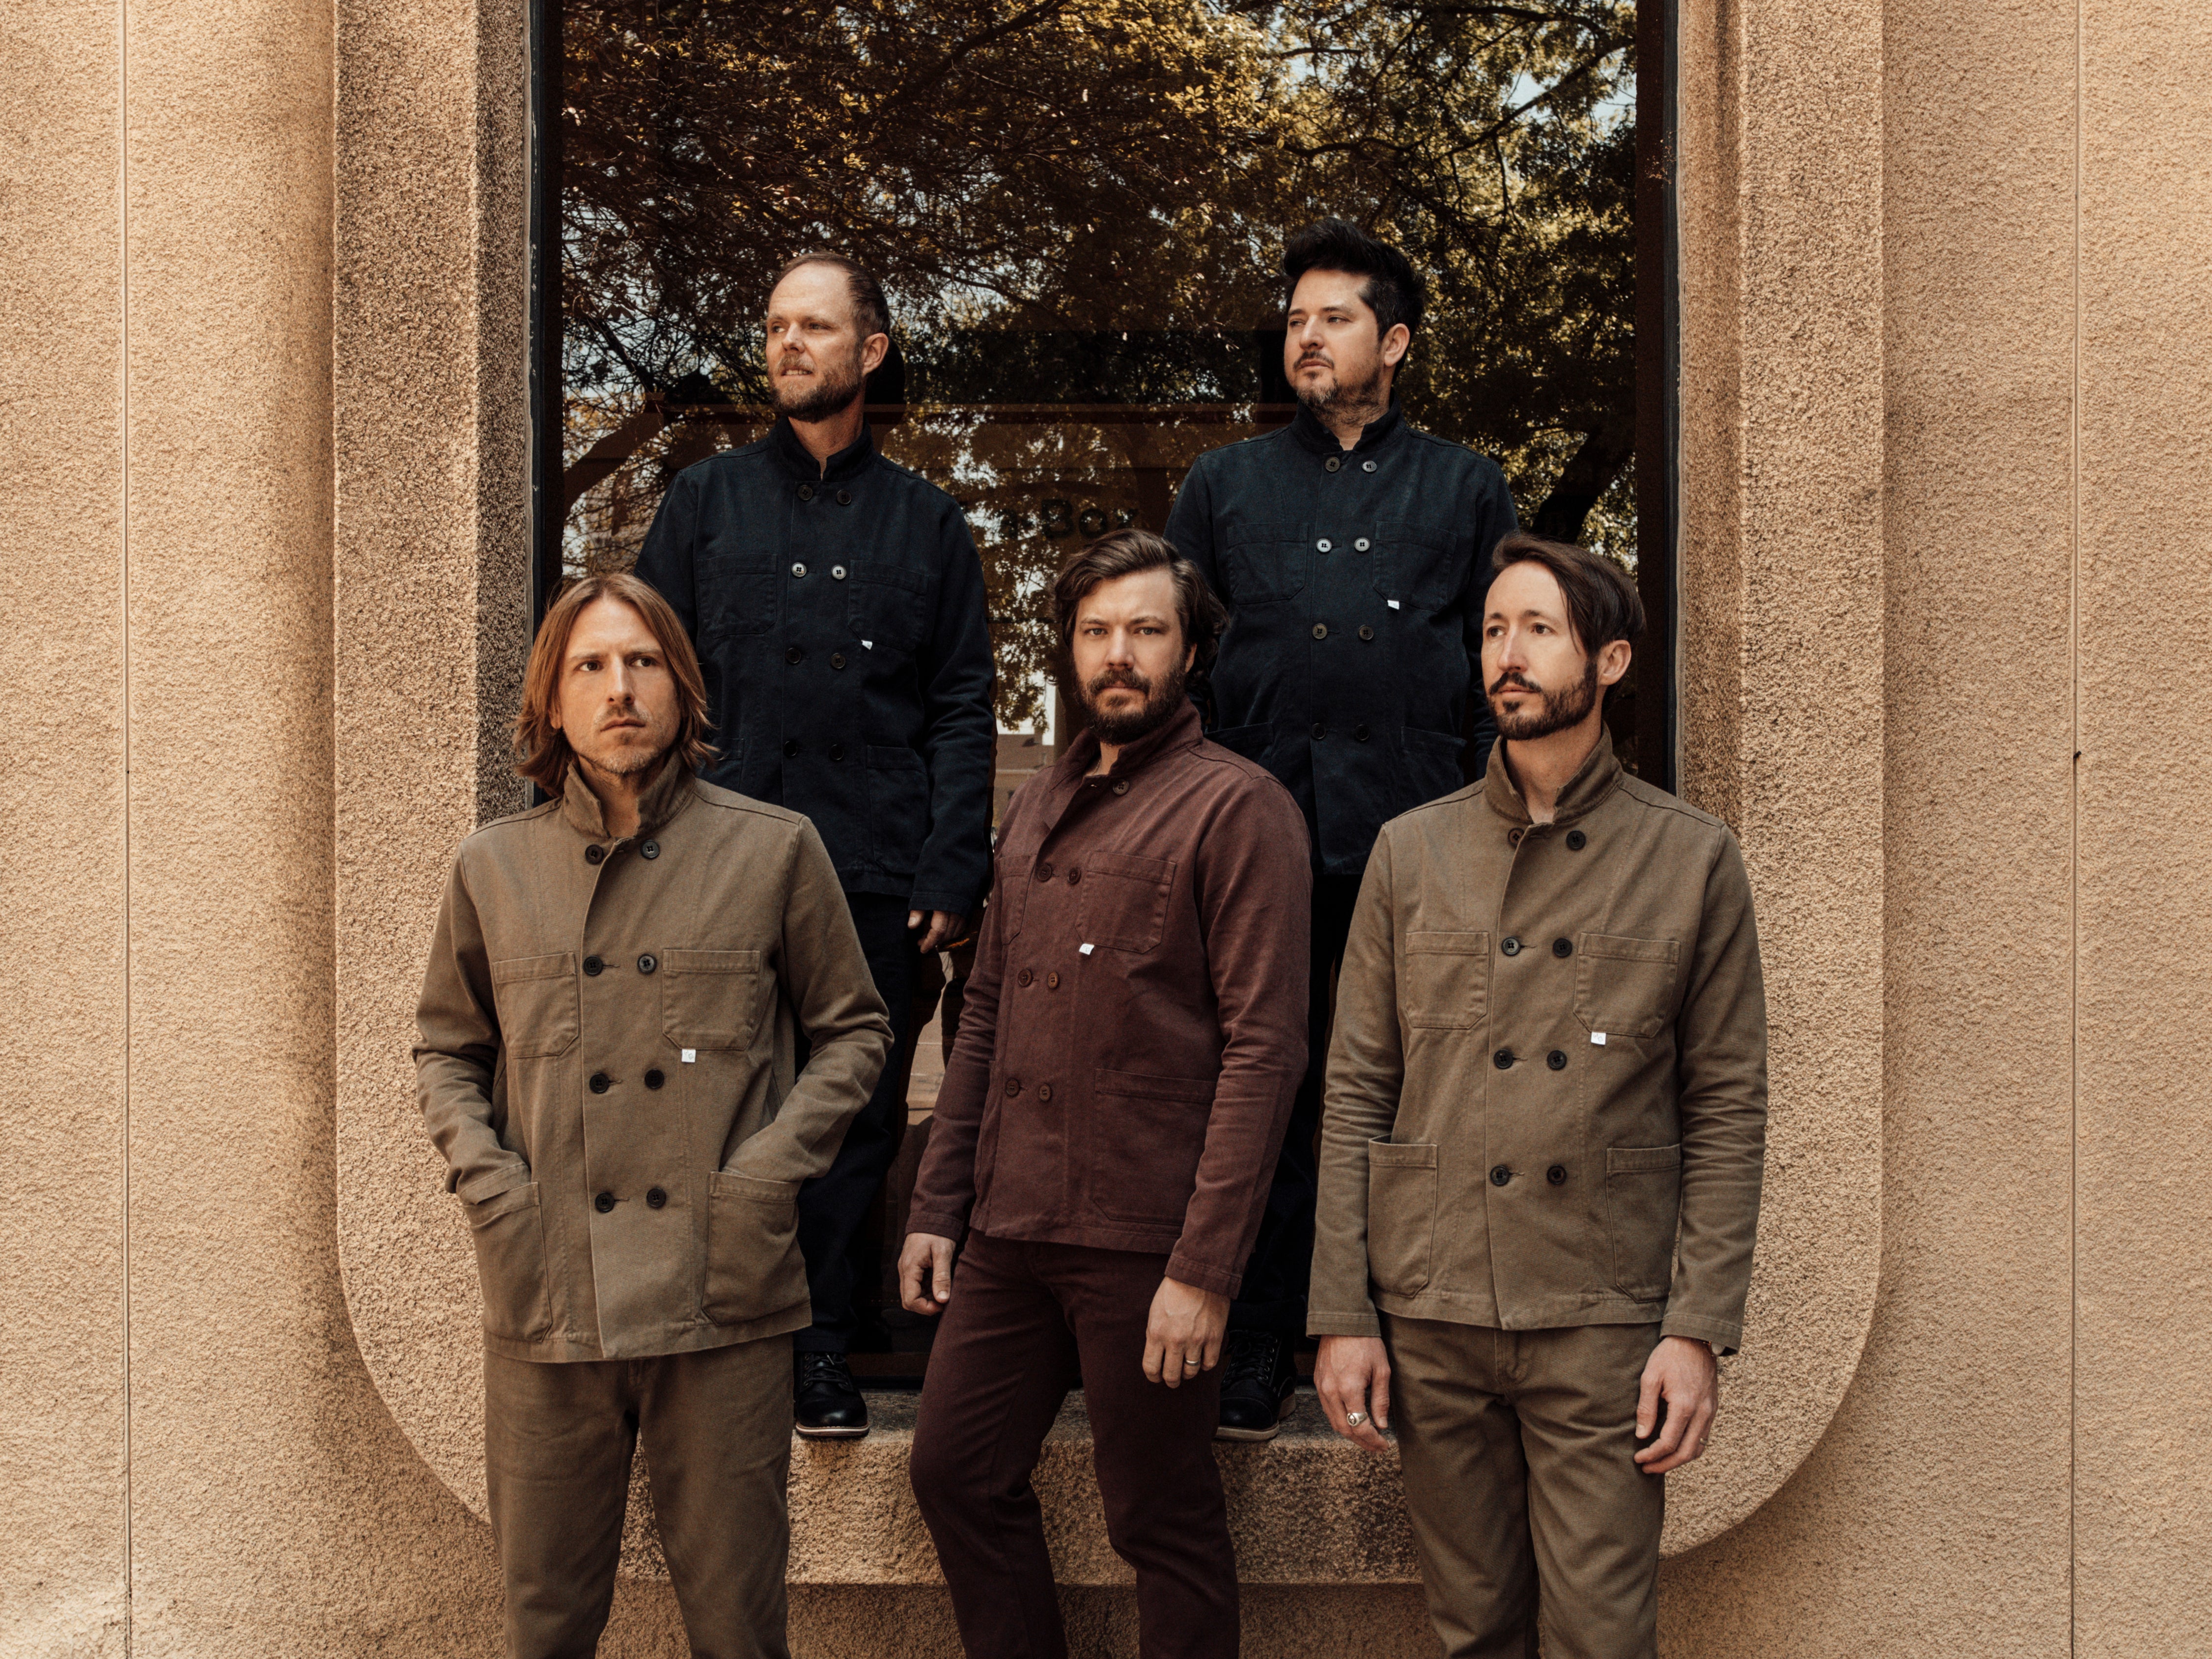 Midlake: ‘There was a big, overarching theme of loss and of finding purpose or creating purpose. That was something that was very palpable to the band and, obviously, to people around the world'